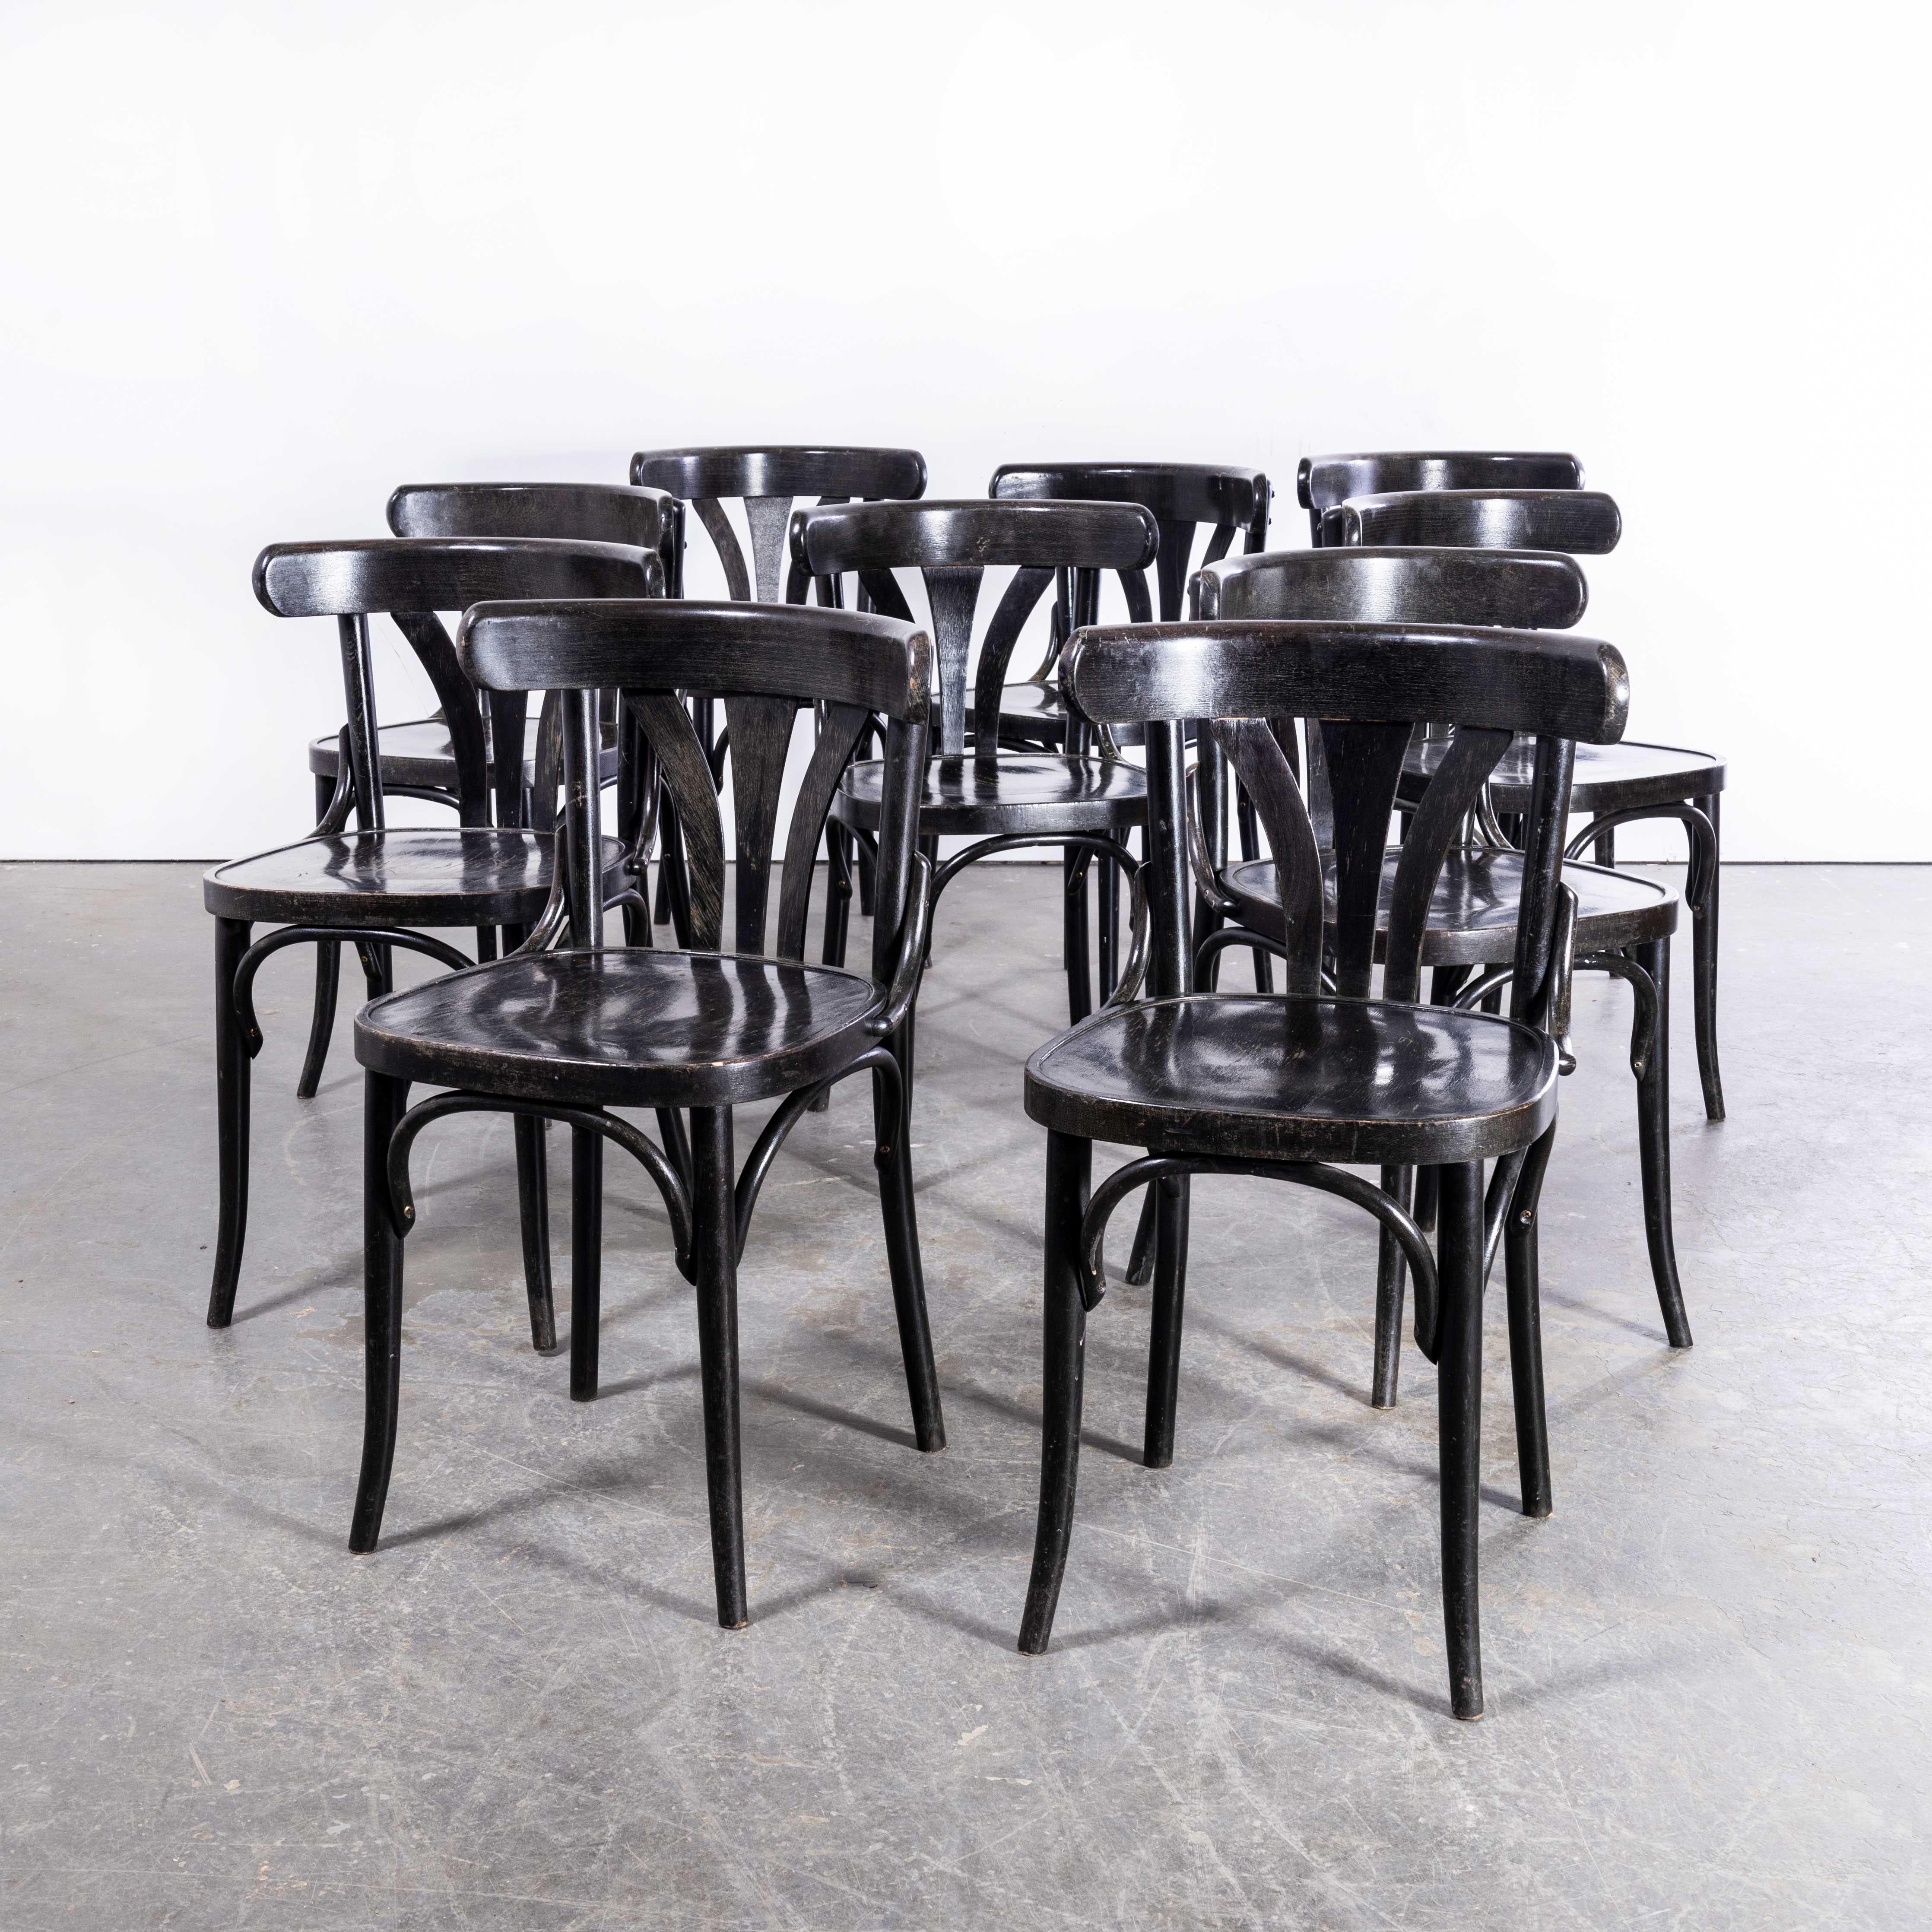 1970s Dark ebonized Bentwood Dining Chair – Set Of Ten
1970s Dark ebonized Bentwood Dining Chair – Set Of Ten. Good quality set of ten Classic bentwood chairs with a typical fan back design. The chairs were made in Eastern Europe using solid steam